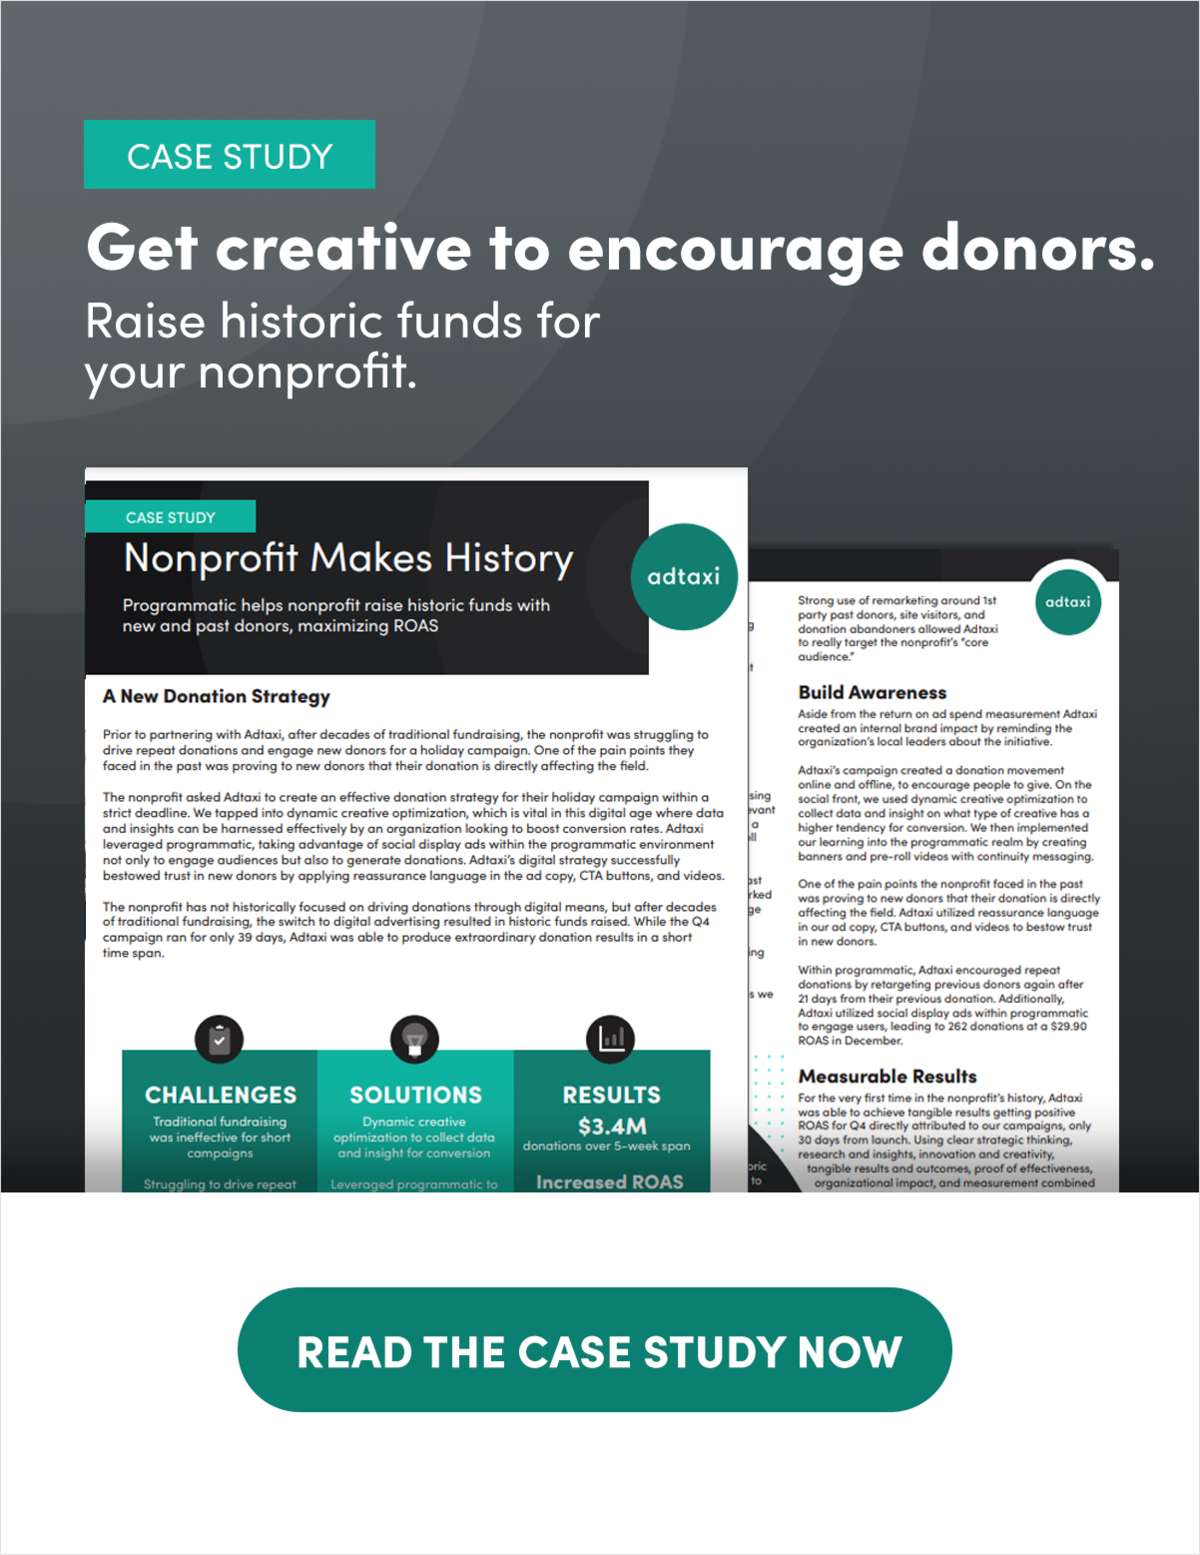 Nonprofit Makes History: Programmatic Helps Nonprofit Raise Historic Funds With New and Past Donors, Maximizing ROAS